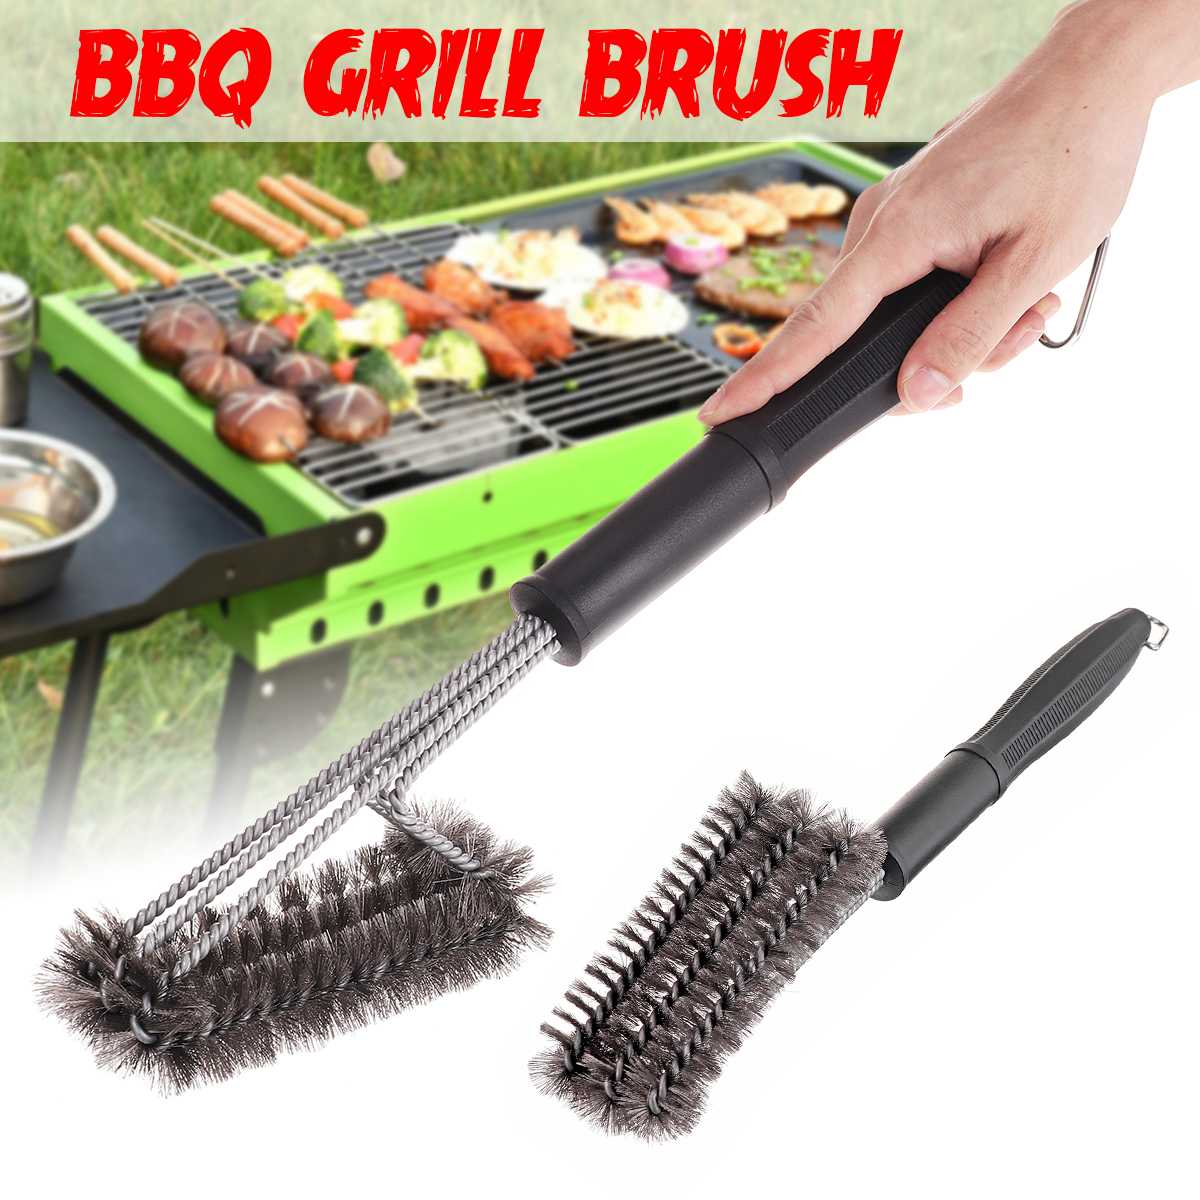 18 Inch Grill Borstel Bbq Gereedschap Grill Borstel 3 Rvs Borstels In 1 Cleanin Bbq Accessoires Beste Cleaner barbecue